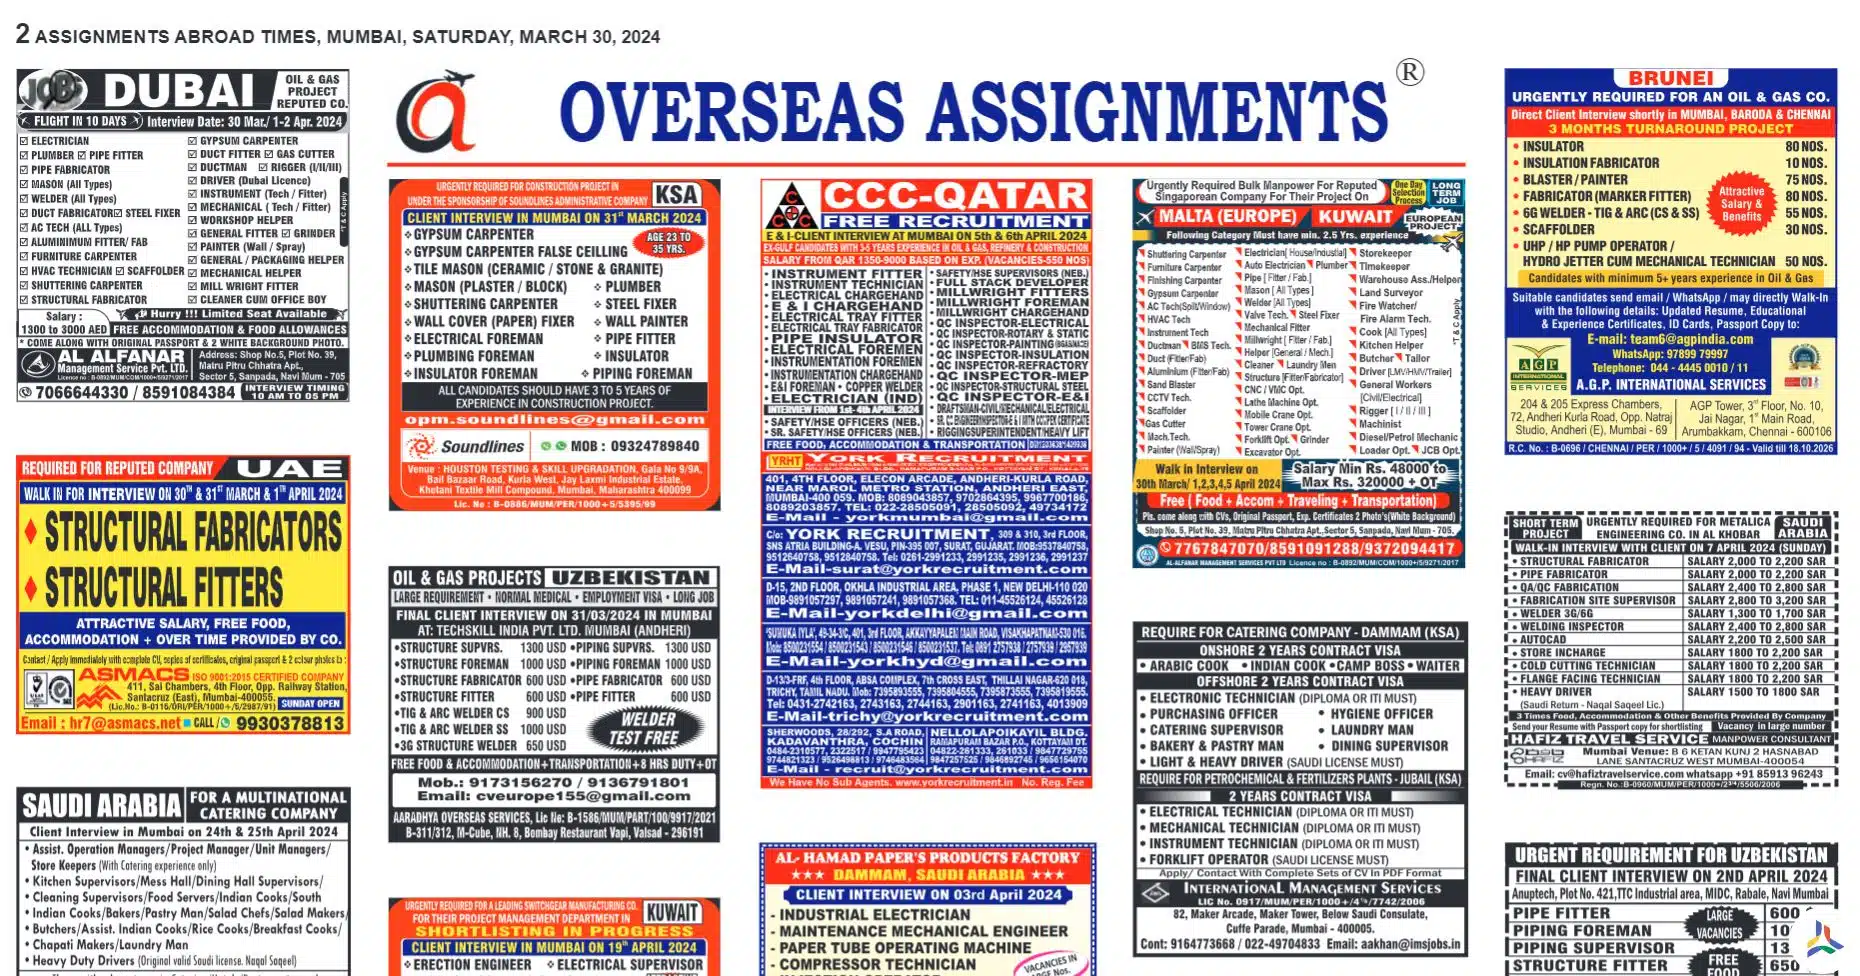 Assignment Abroad Times 30th March 2024